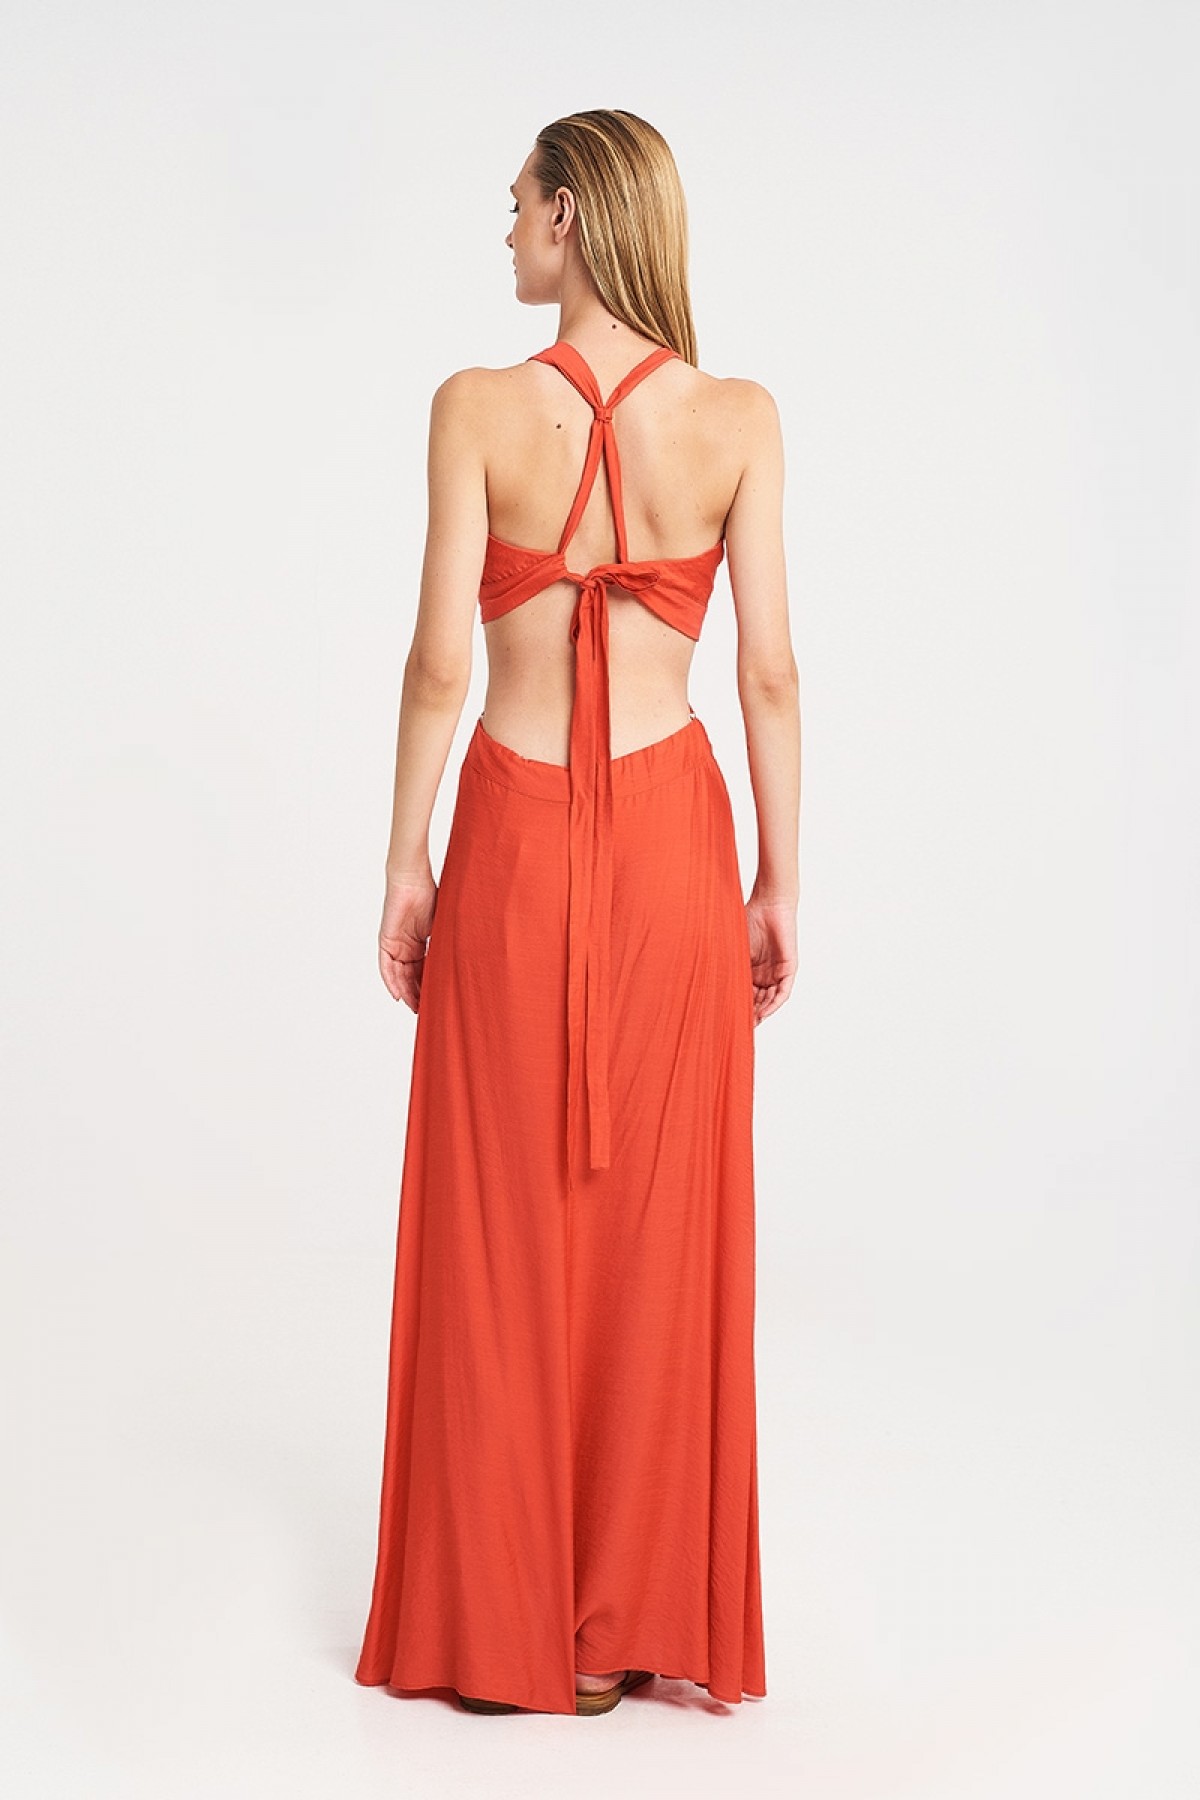 LONG CUT-OUT DRESS IN CORAL RED